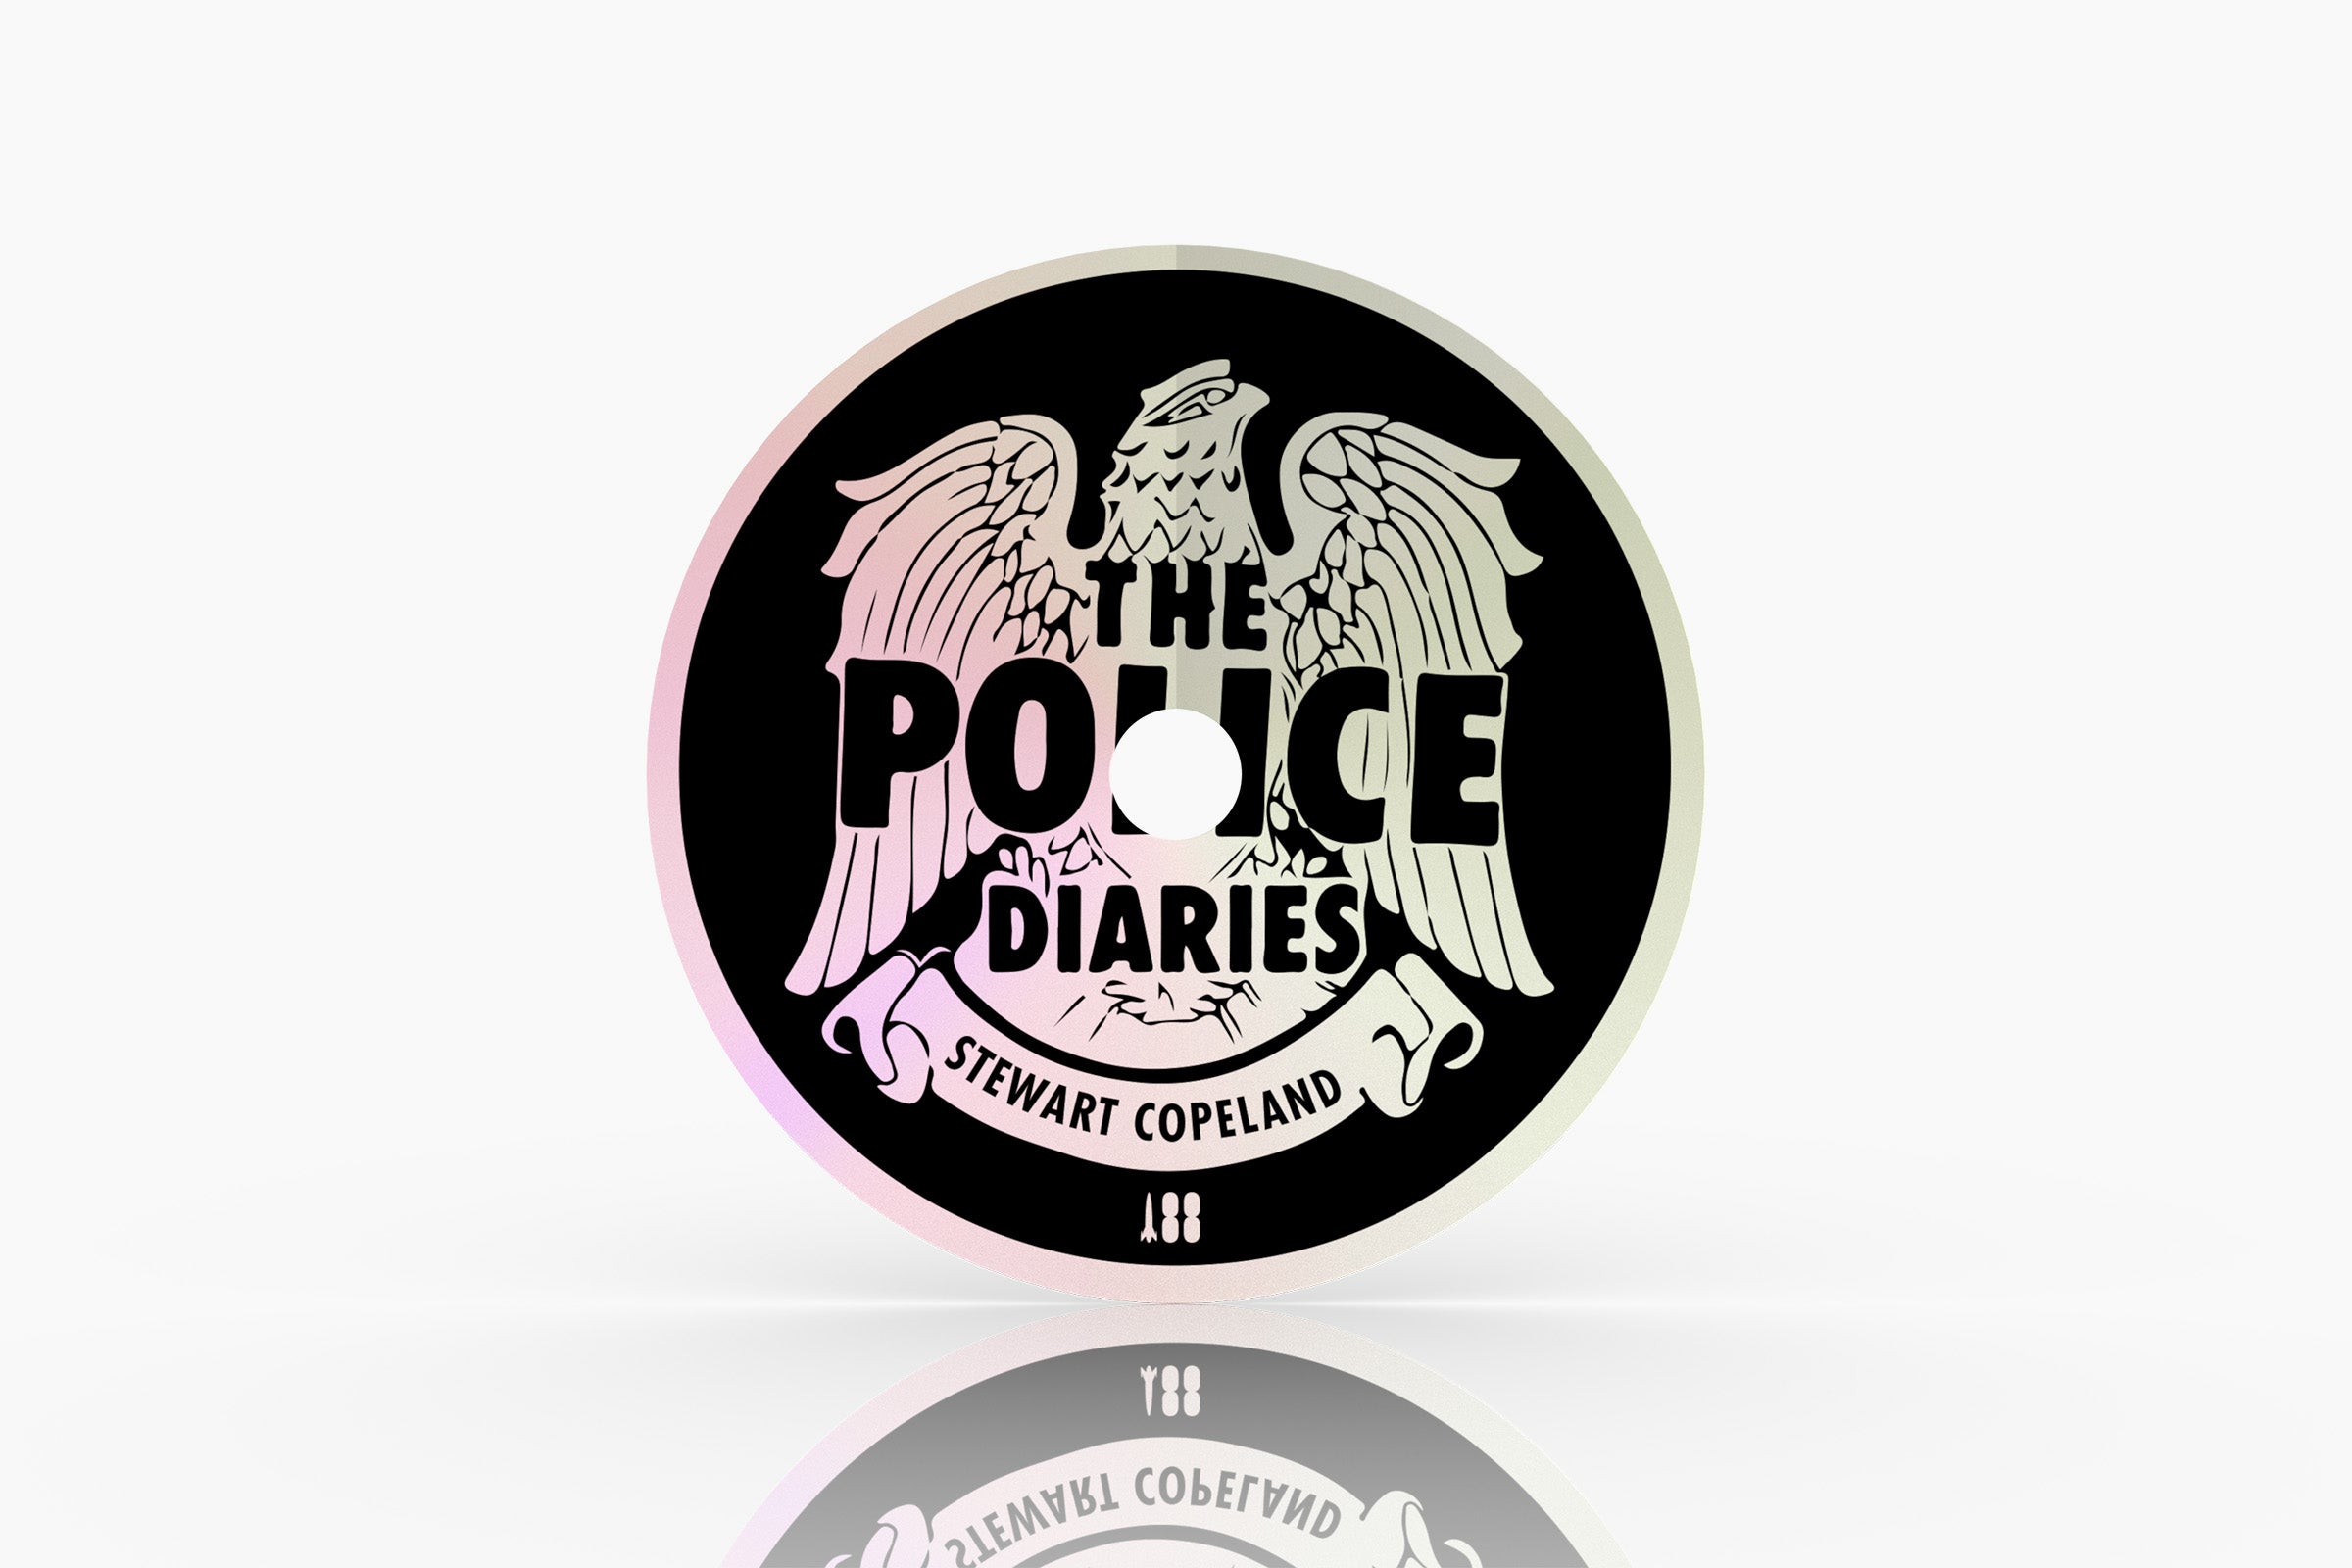 Stewart Copeland’s Police Diaries (Ultimate Edition)